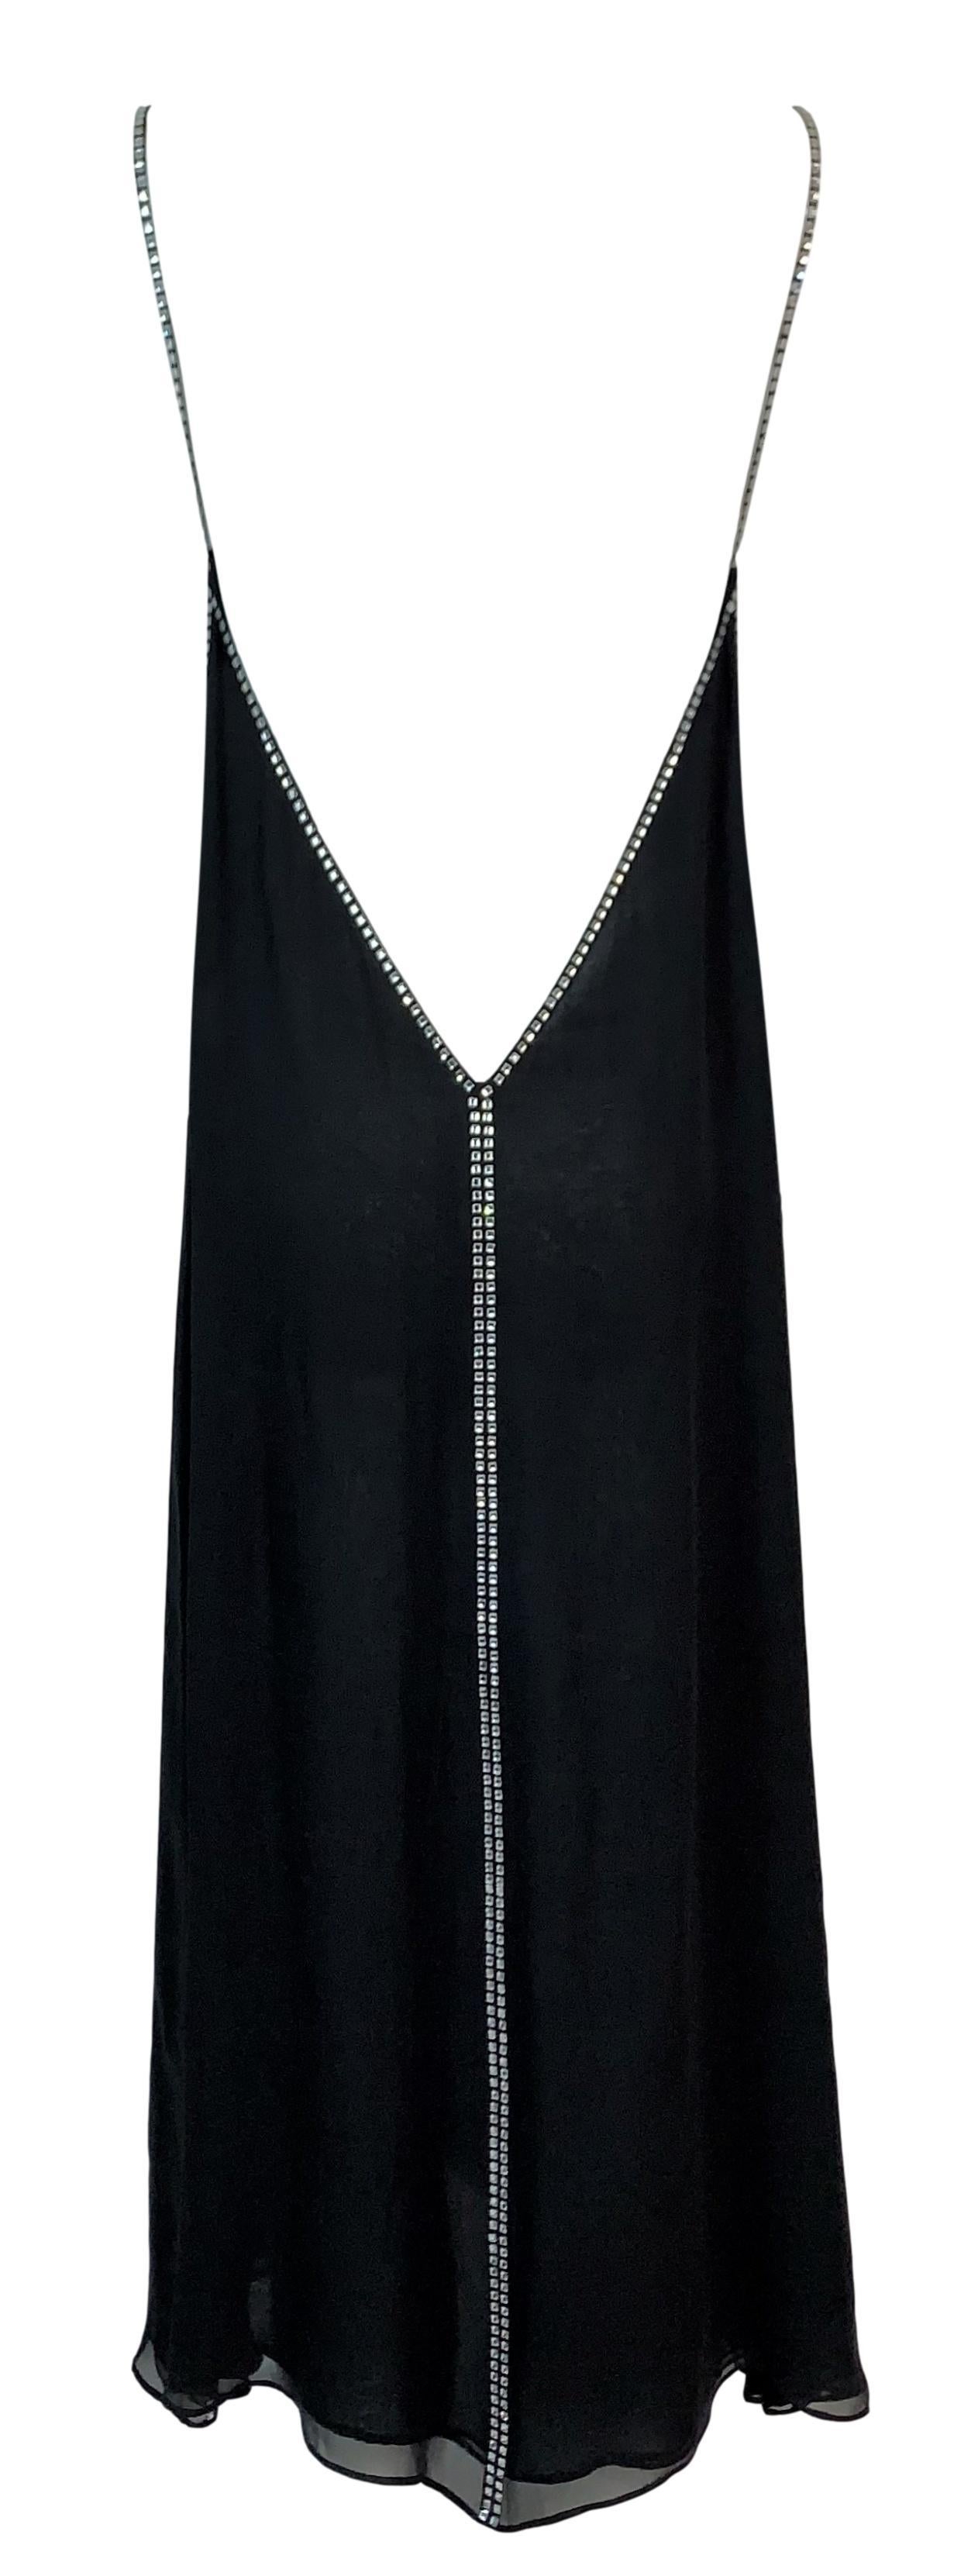 1999 Gucci by Tom Ford Semi-Sheer Black Plunging Embellished Slip Dress In Good Condition In Yukon, OK